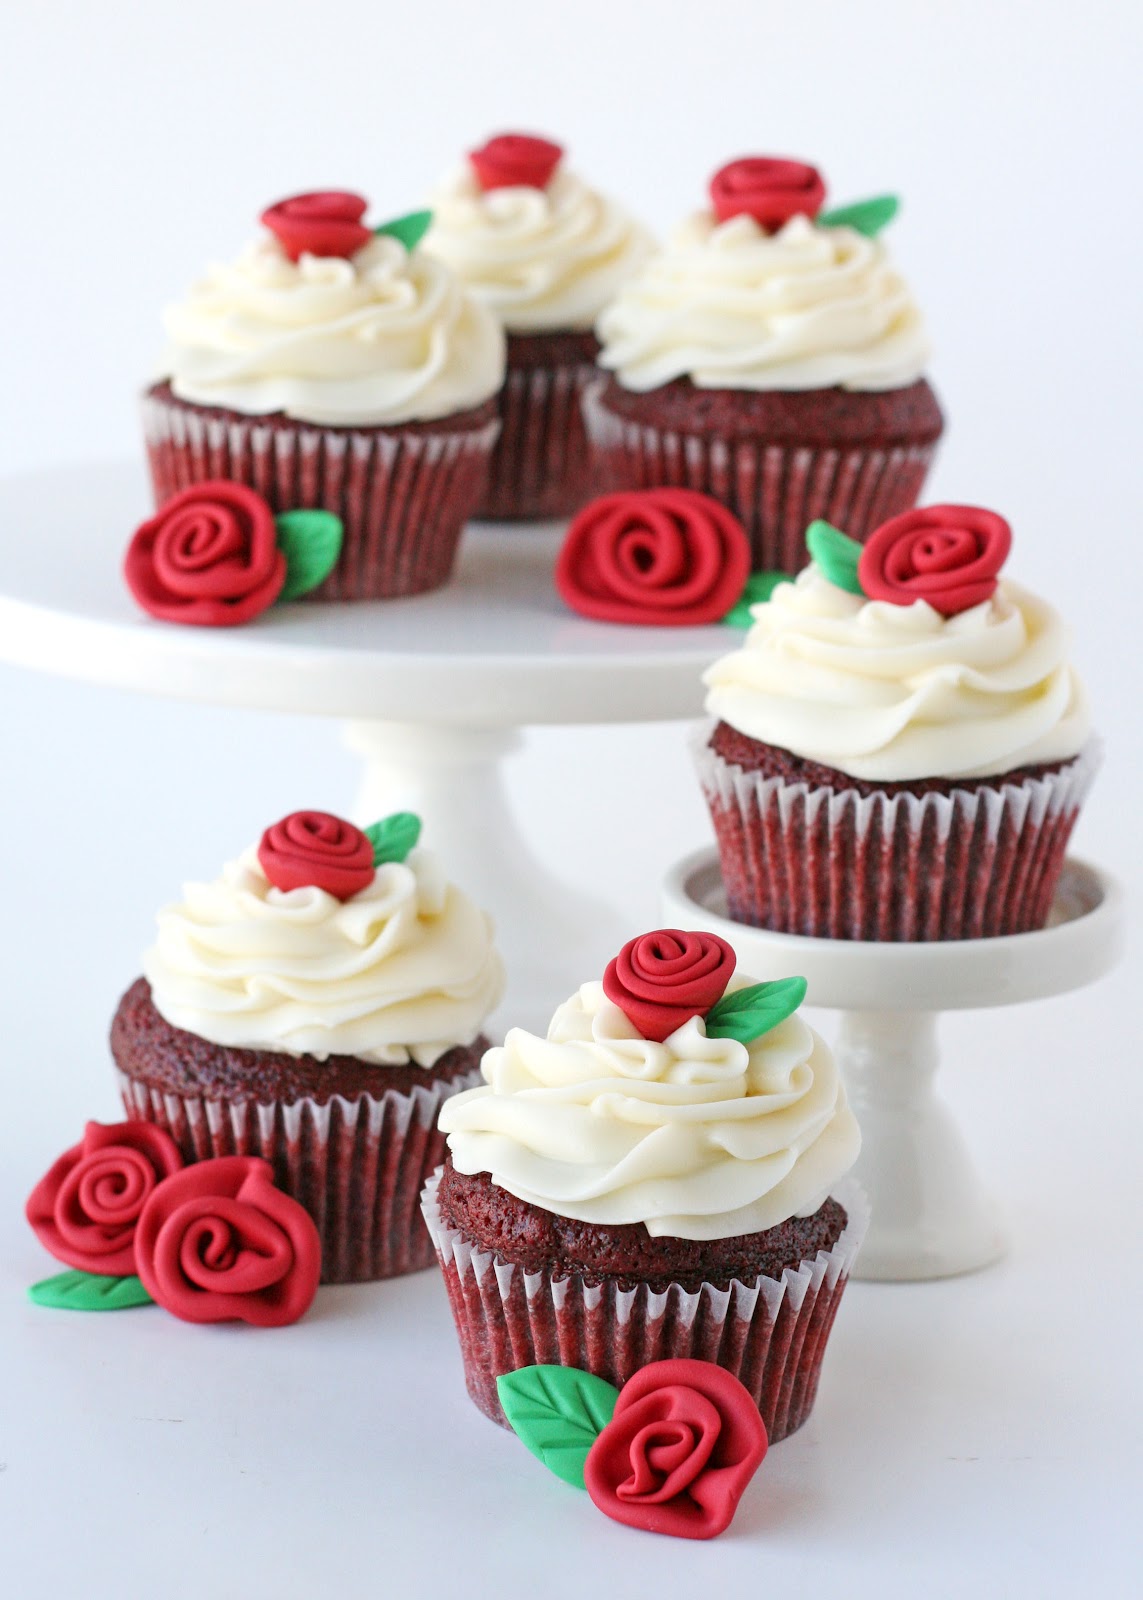 Red Velvet Cupcakes with Roses {Recipe} - Glorious Treats